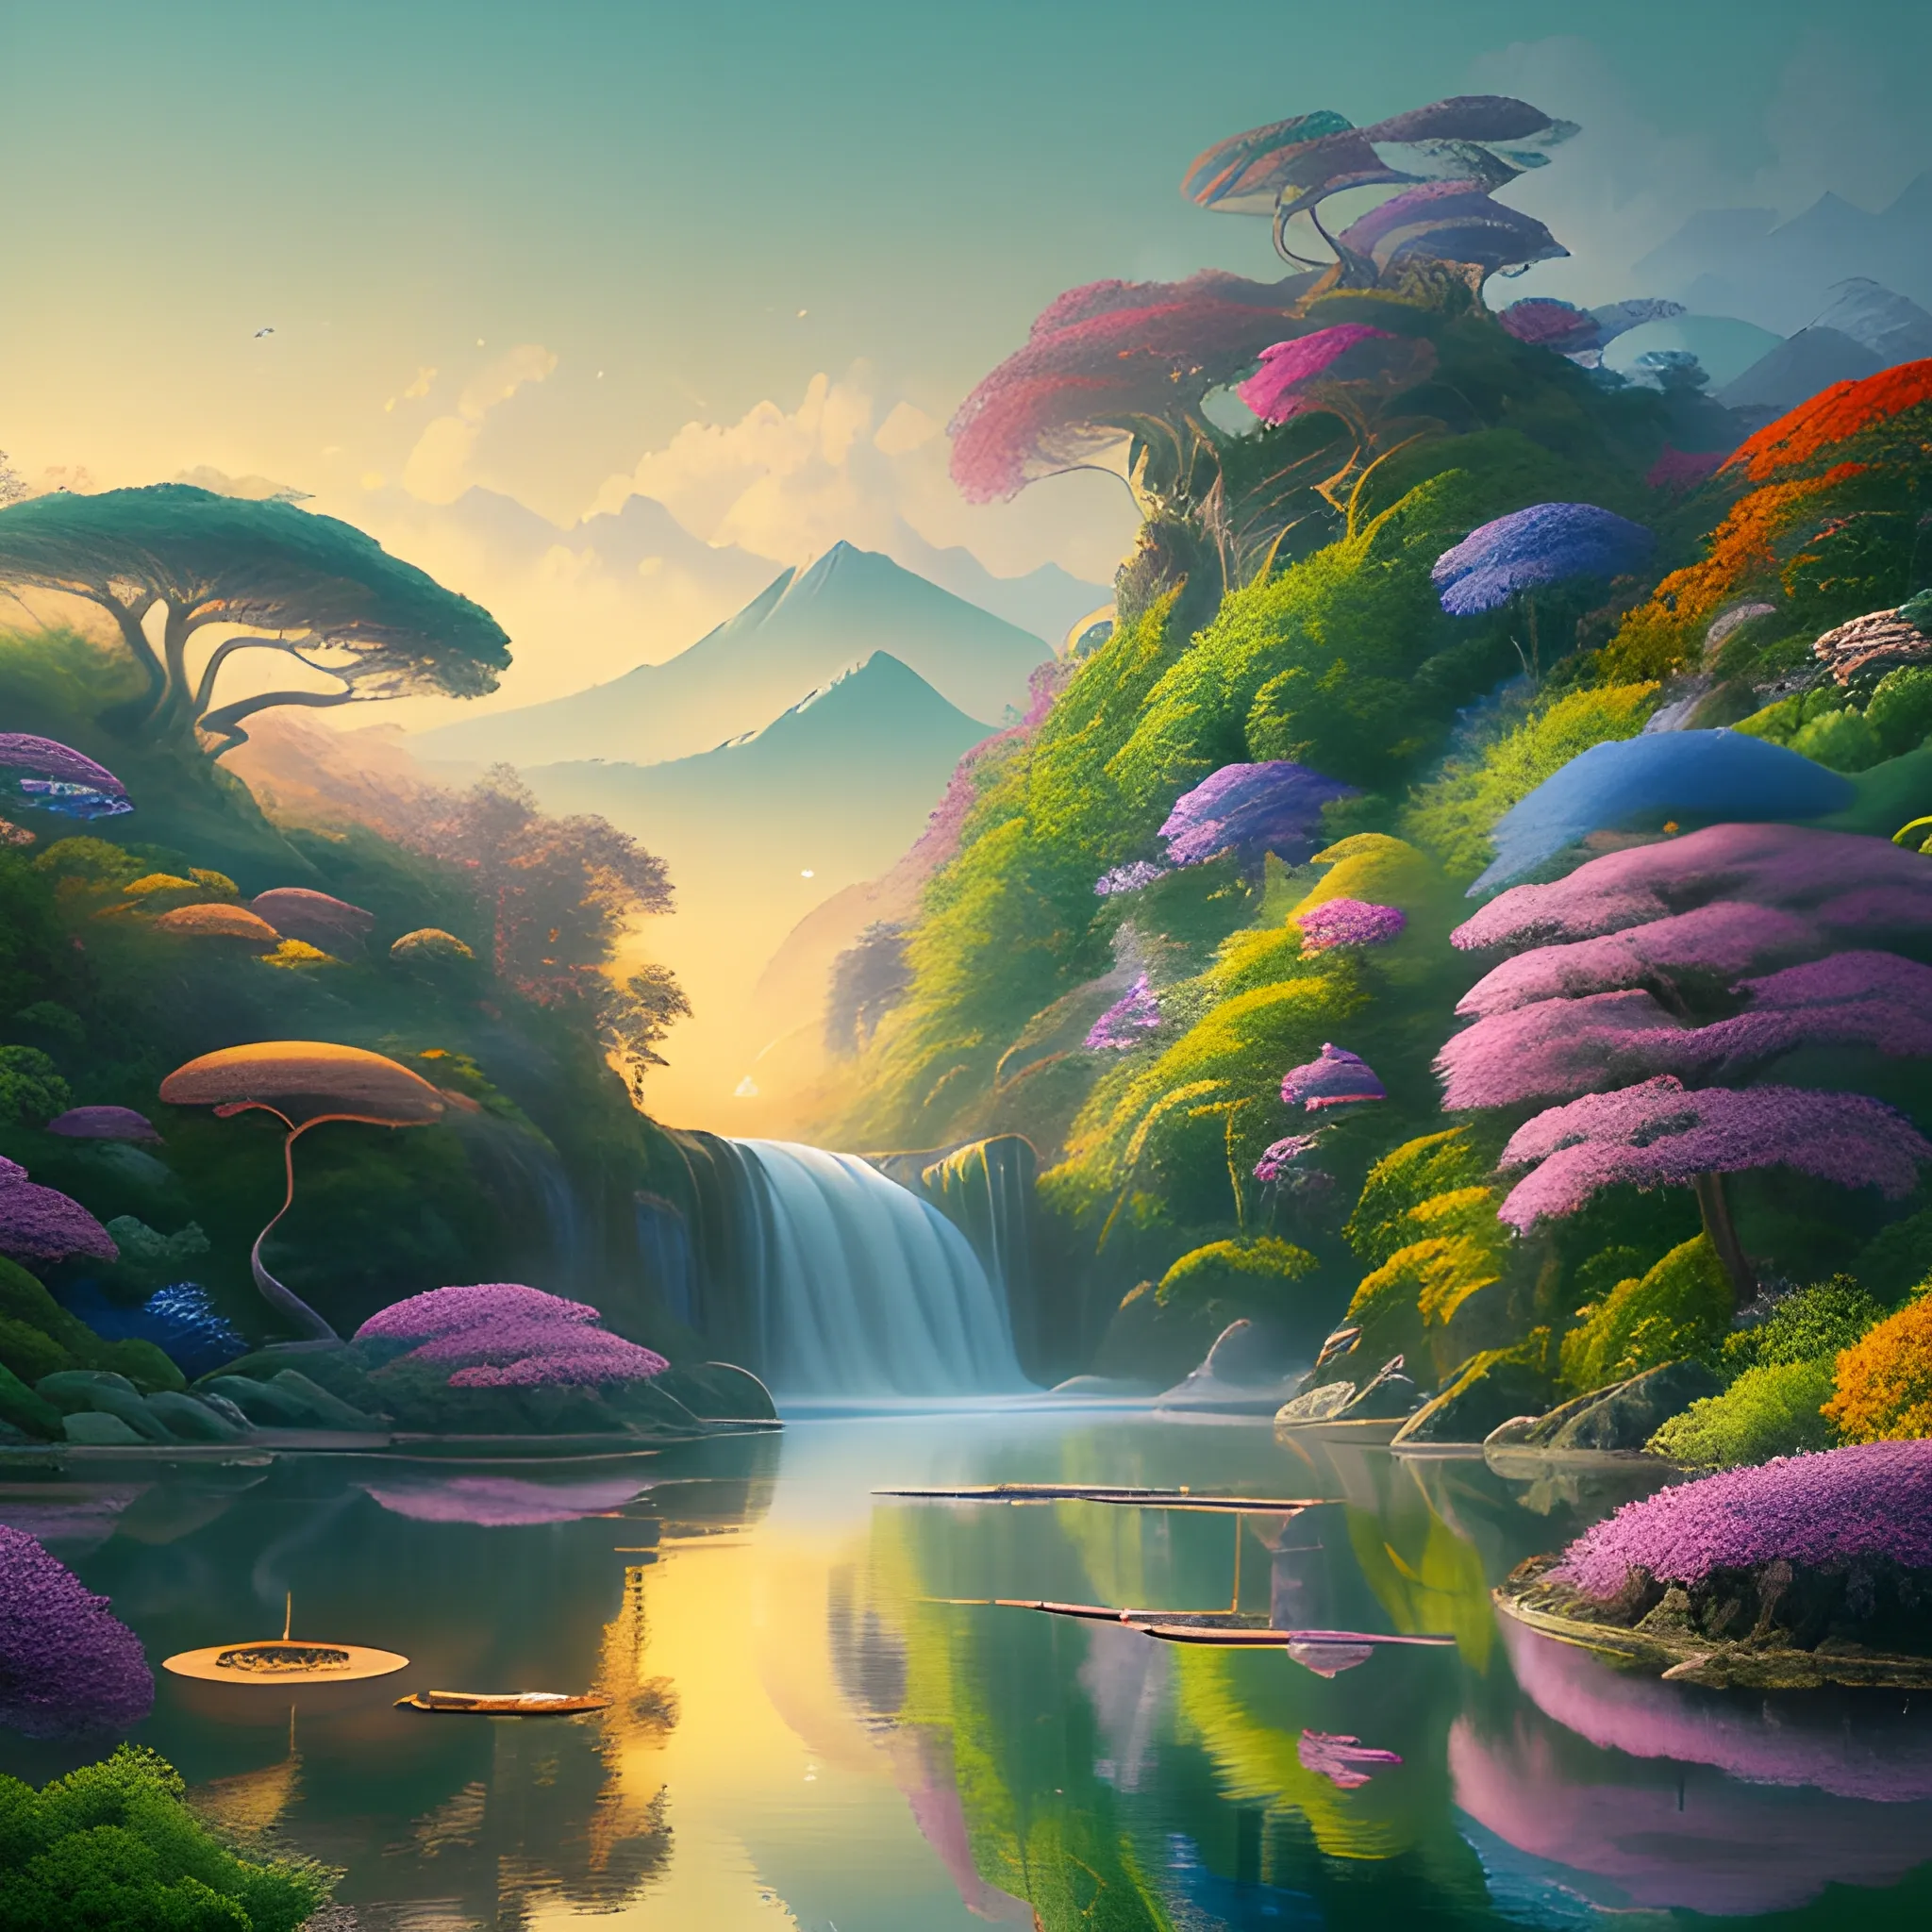 (by Ananta Mandal (and Andrew Biraj:0.5)), (in the style of nihonga), Style: Abstract, Medium: Digital illustration, Subject: A Bodhisattva of Compassion in the middle of picture, An otherworldly landscape with floating islands, cascading waterfalls, and vibrant flora and fauna. Camera Angle: Overhead shot capturing the vastness and intricate details of the scene. The colors are saturated, and the lighting creates a warm and ethereal atmosphere. The painting is highly detailed, with every brushstroke capturing the complexity of the imaginary world., (high quality), (detailed), (masterpiece), (best quality), (highres), (extremely detailed), (8k), seed:712315689